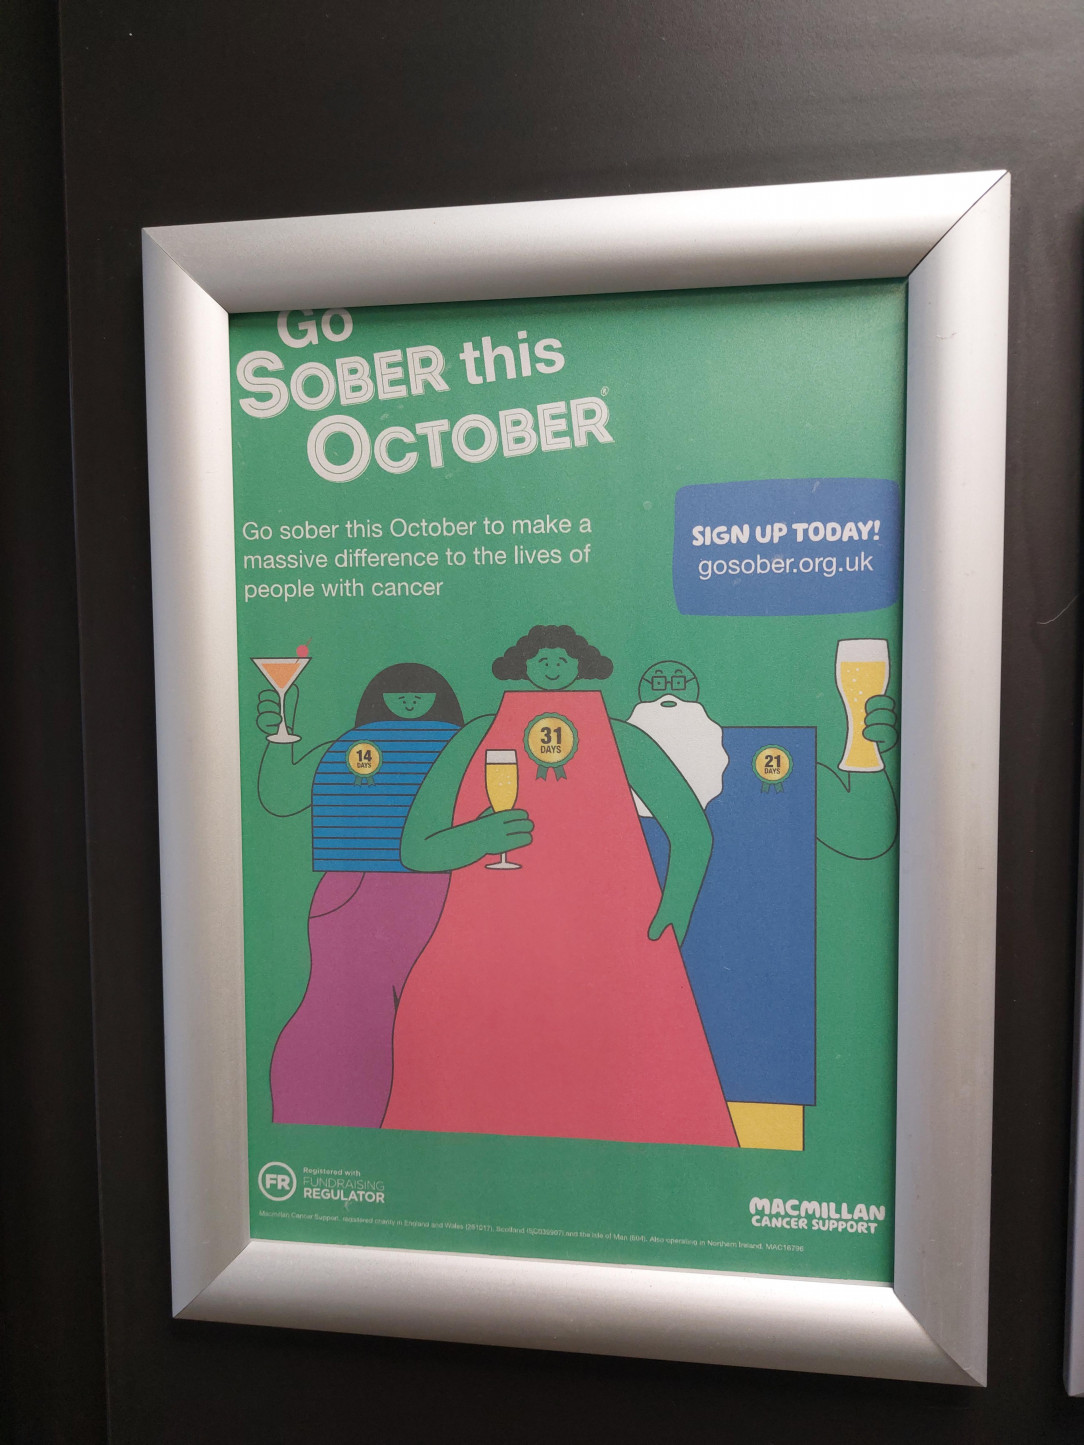 A go sober advert. Featuring people drinking alcohol